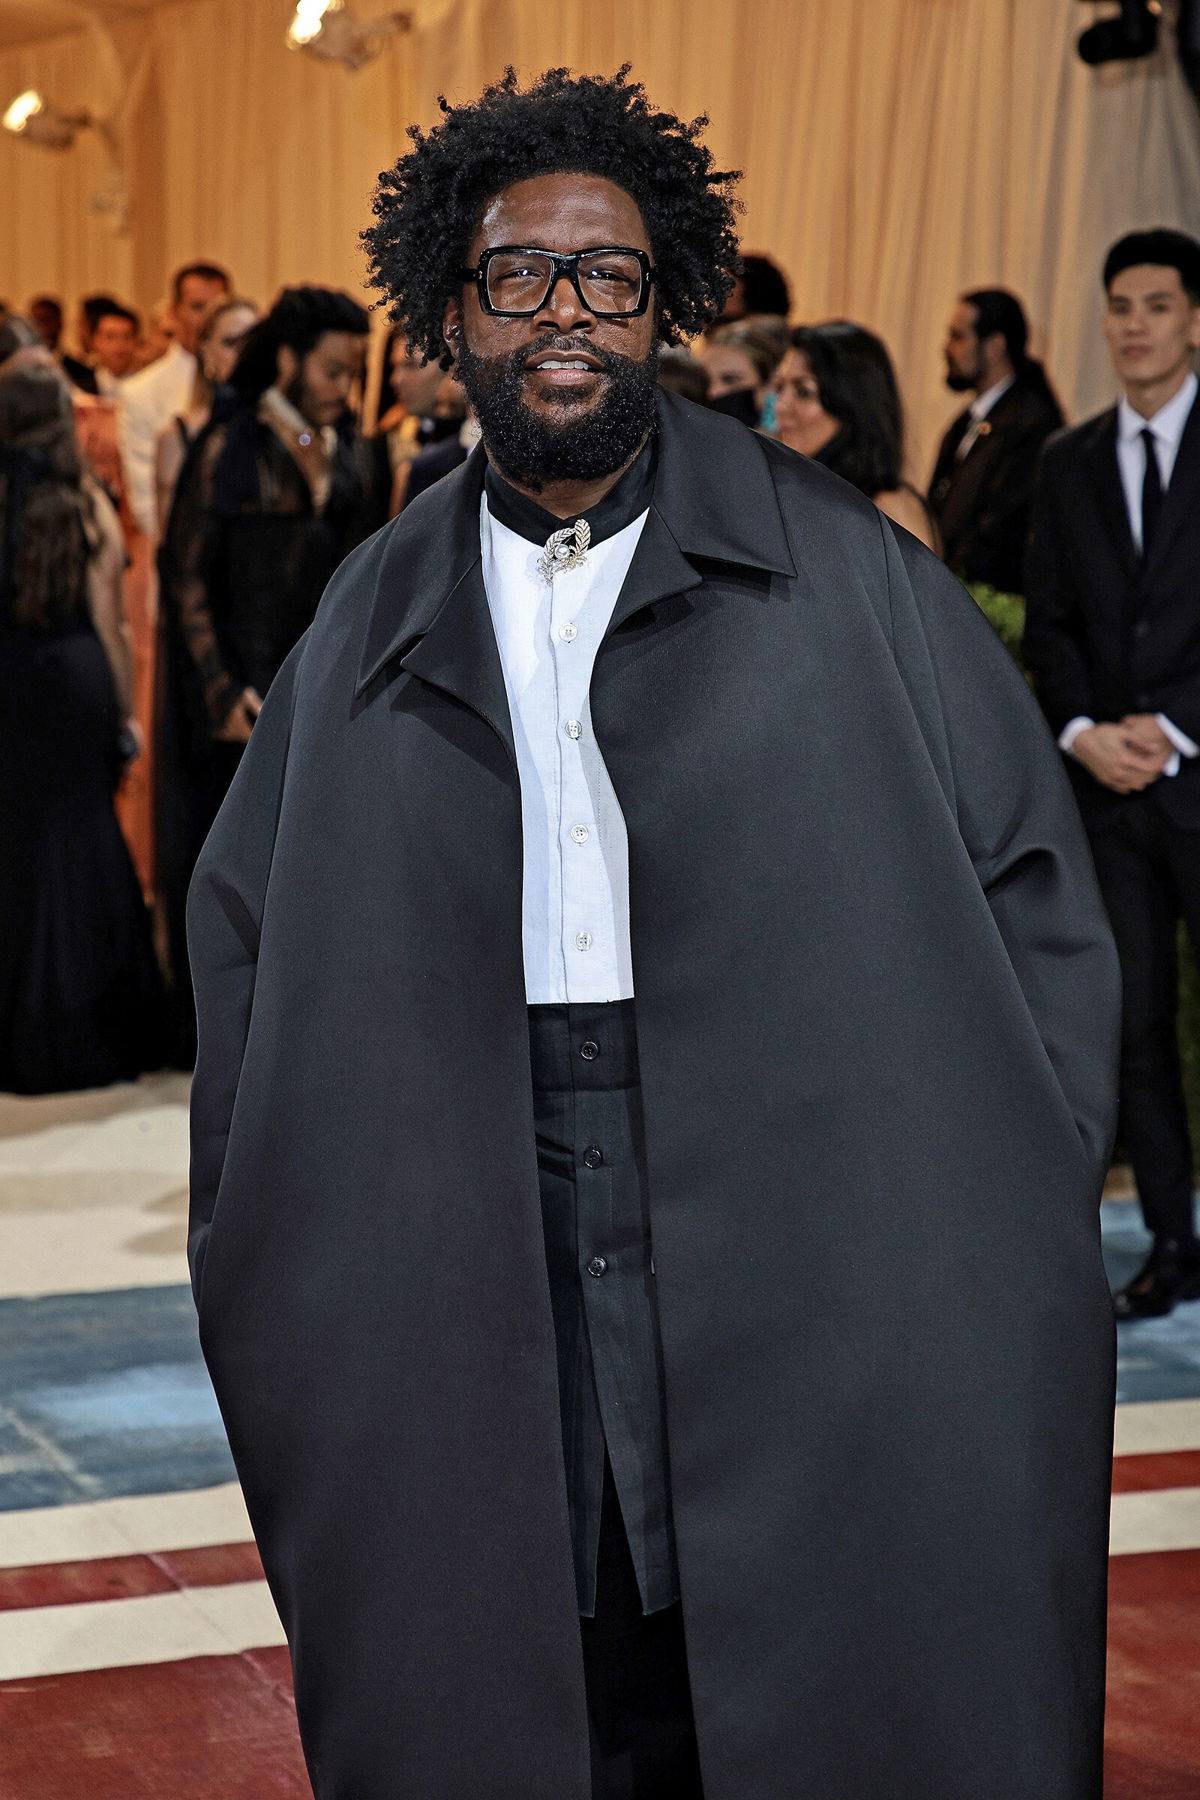 <i>Dimitrios Kambouris/Getty Images for The Met Museum/Vogue</i><br/>Questlove